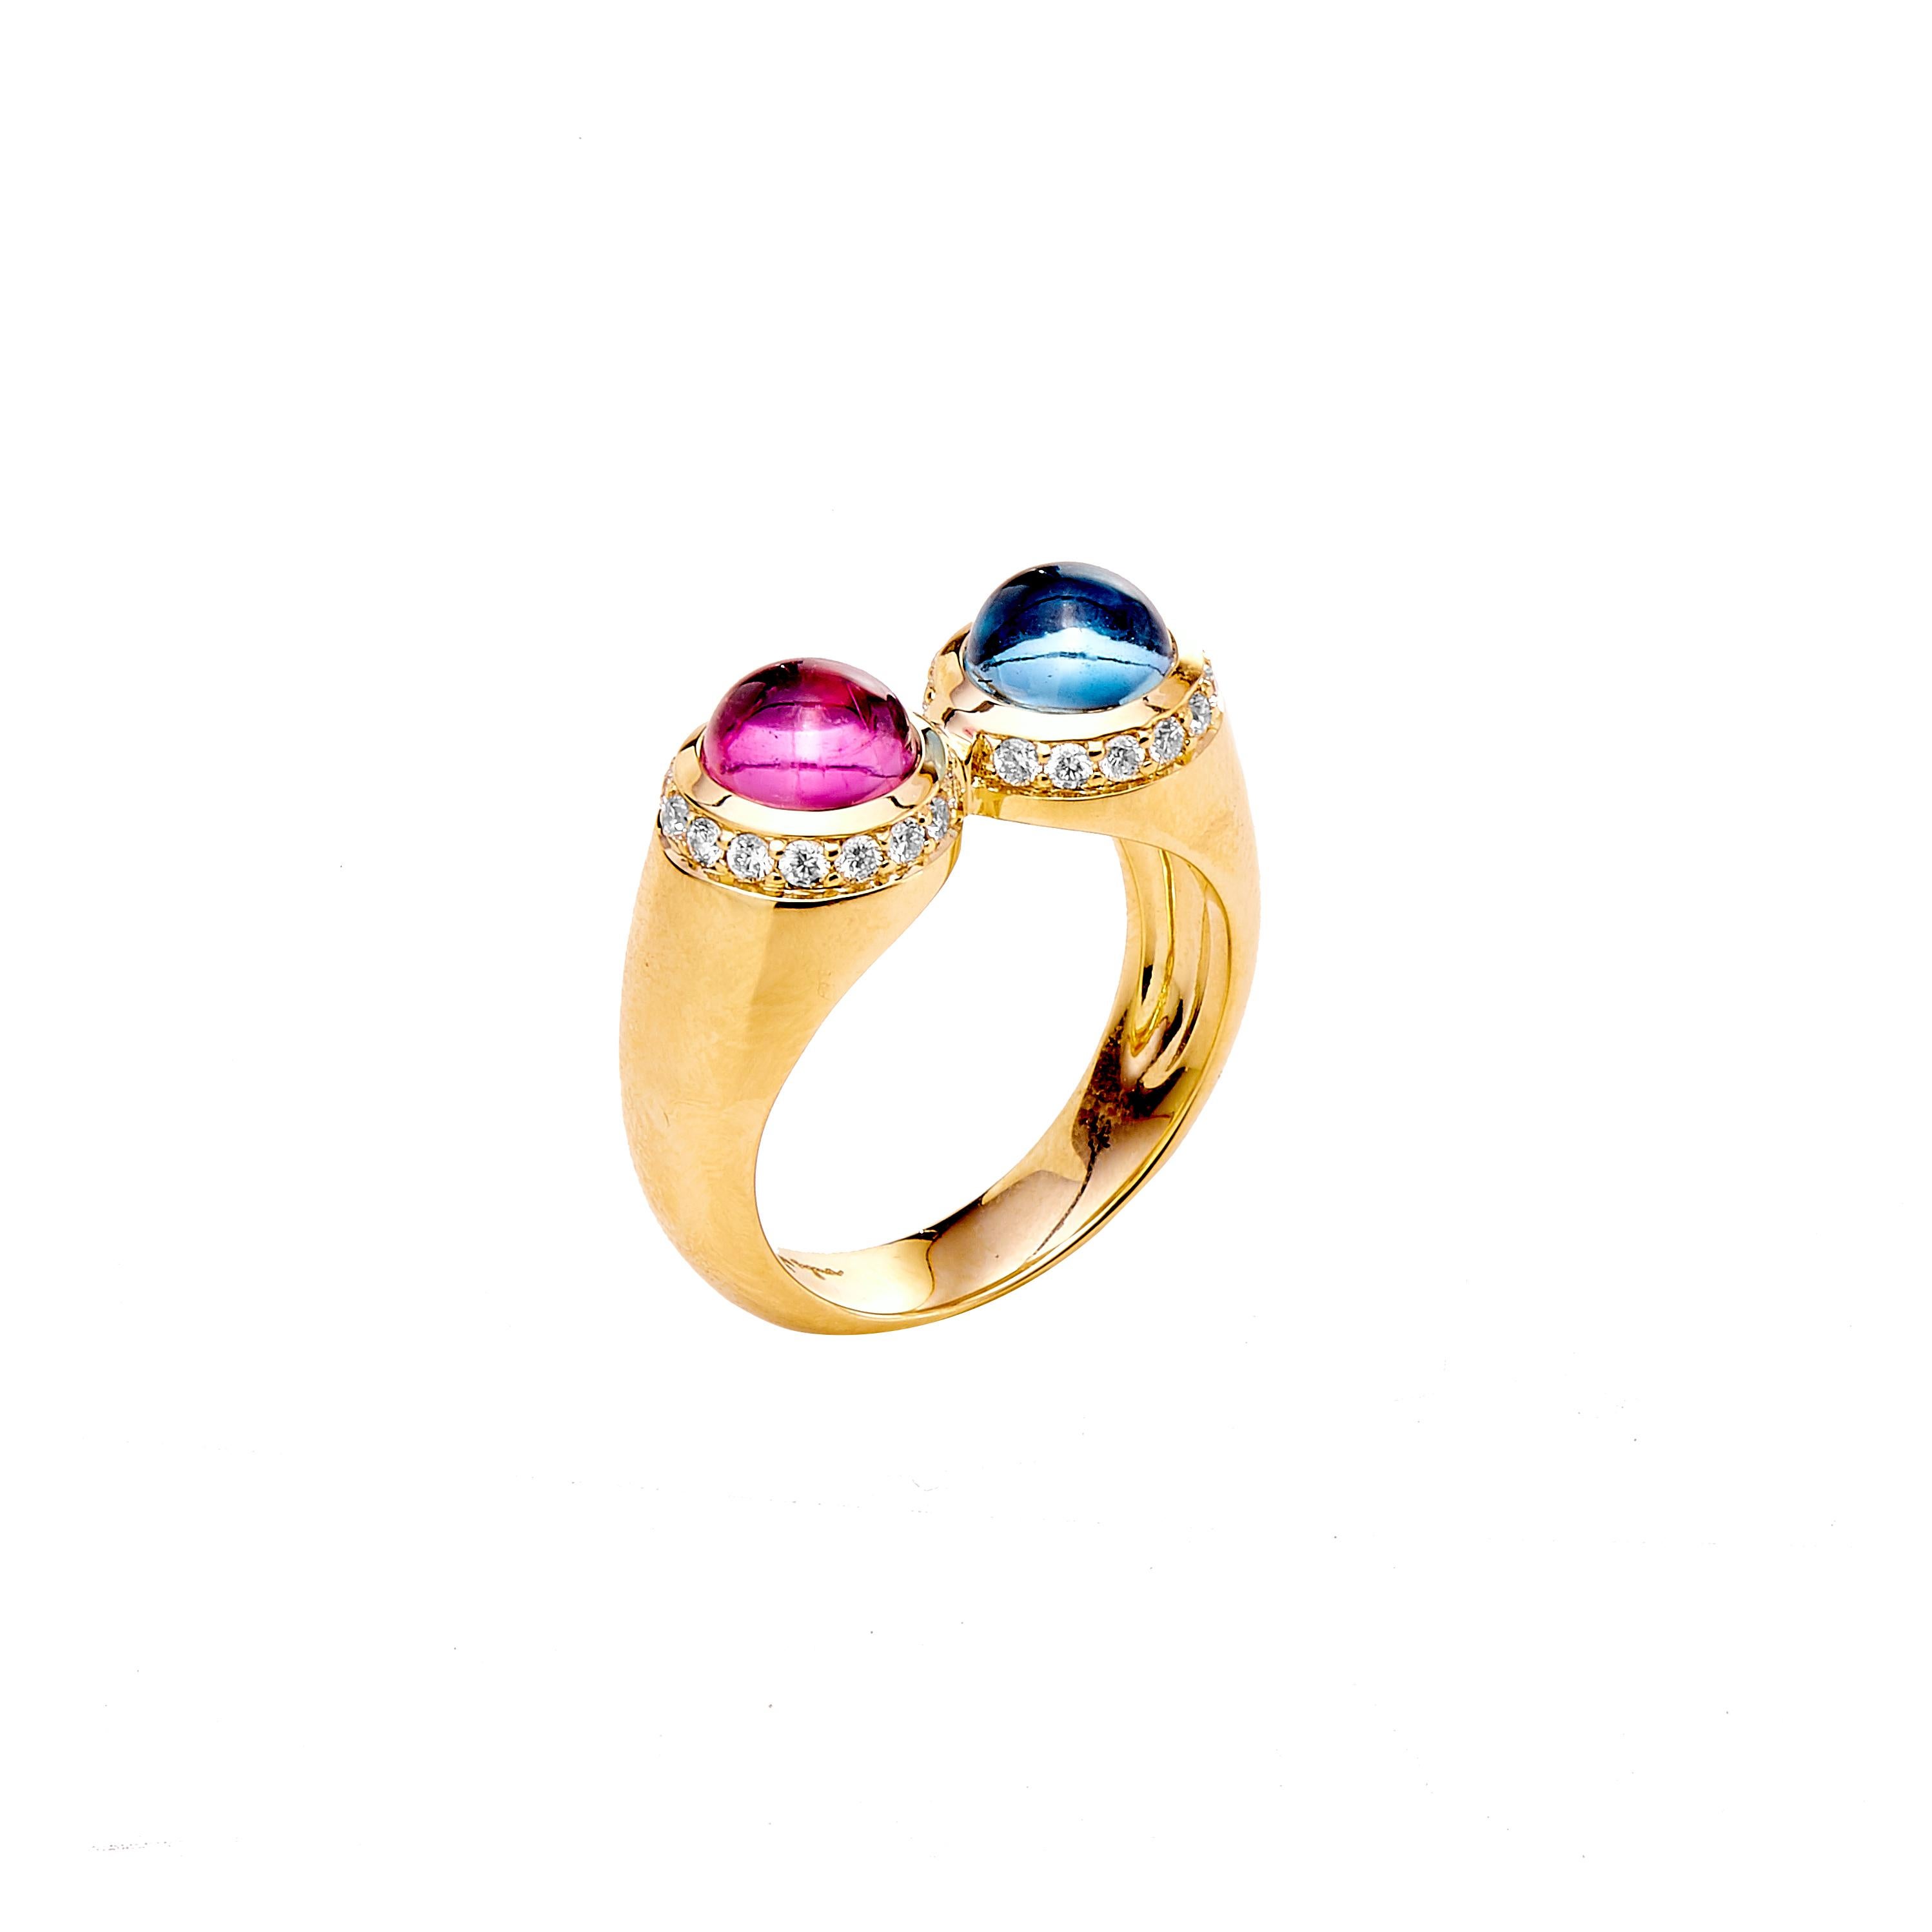 Created in 18 karat yellow gold
Rubellite 1.4 carats approx.
Blue topaz 1.7 carats approx.
Diamond 0.4 carat approx.
Ring size - US 6.5, can be sized as per request
Limited edition

Encompassing 18 karat yellow gold, this limited-edition ring